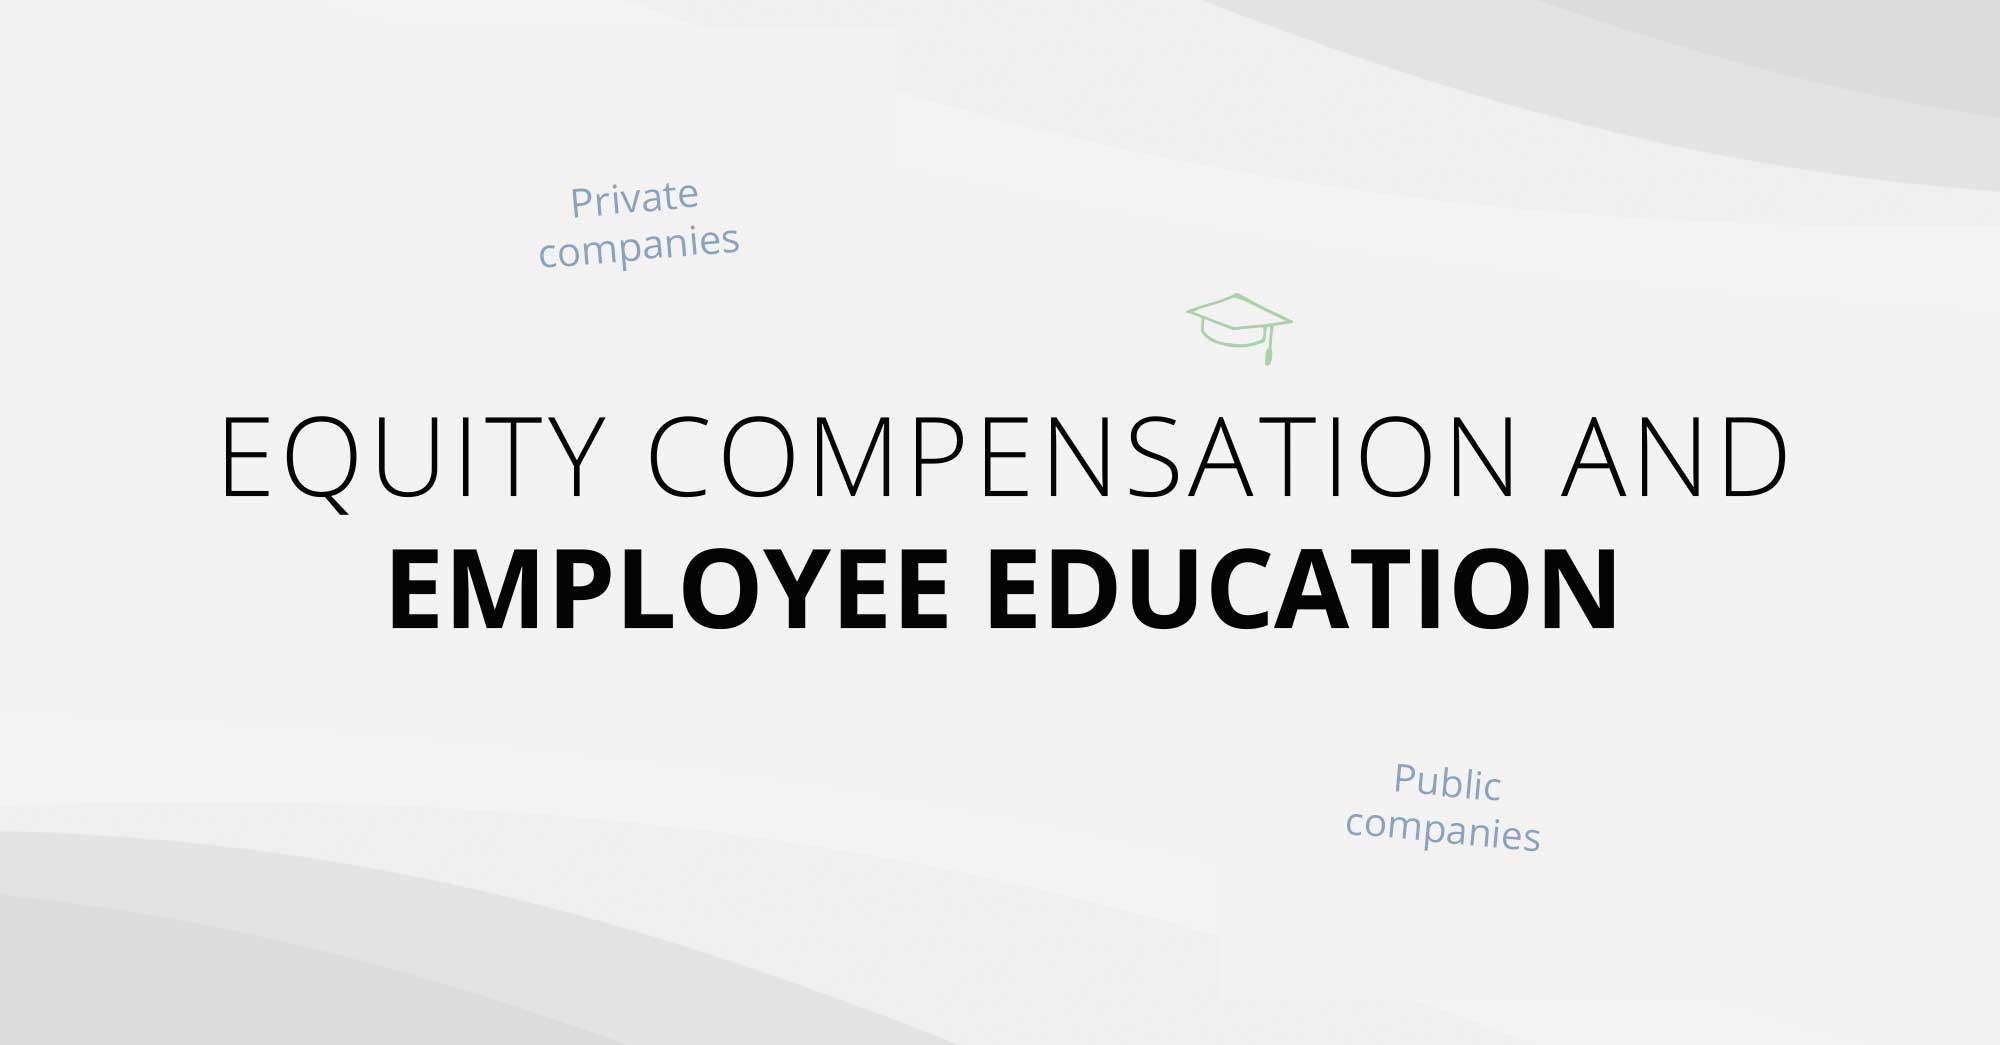 How to explain private company equity compensation to your employees